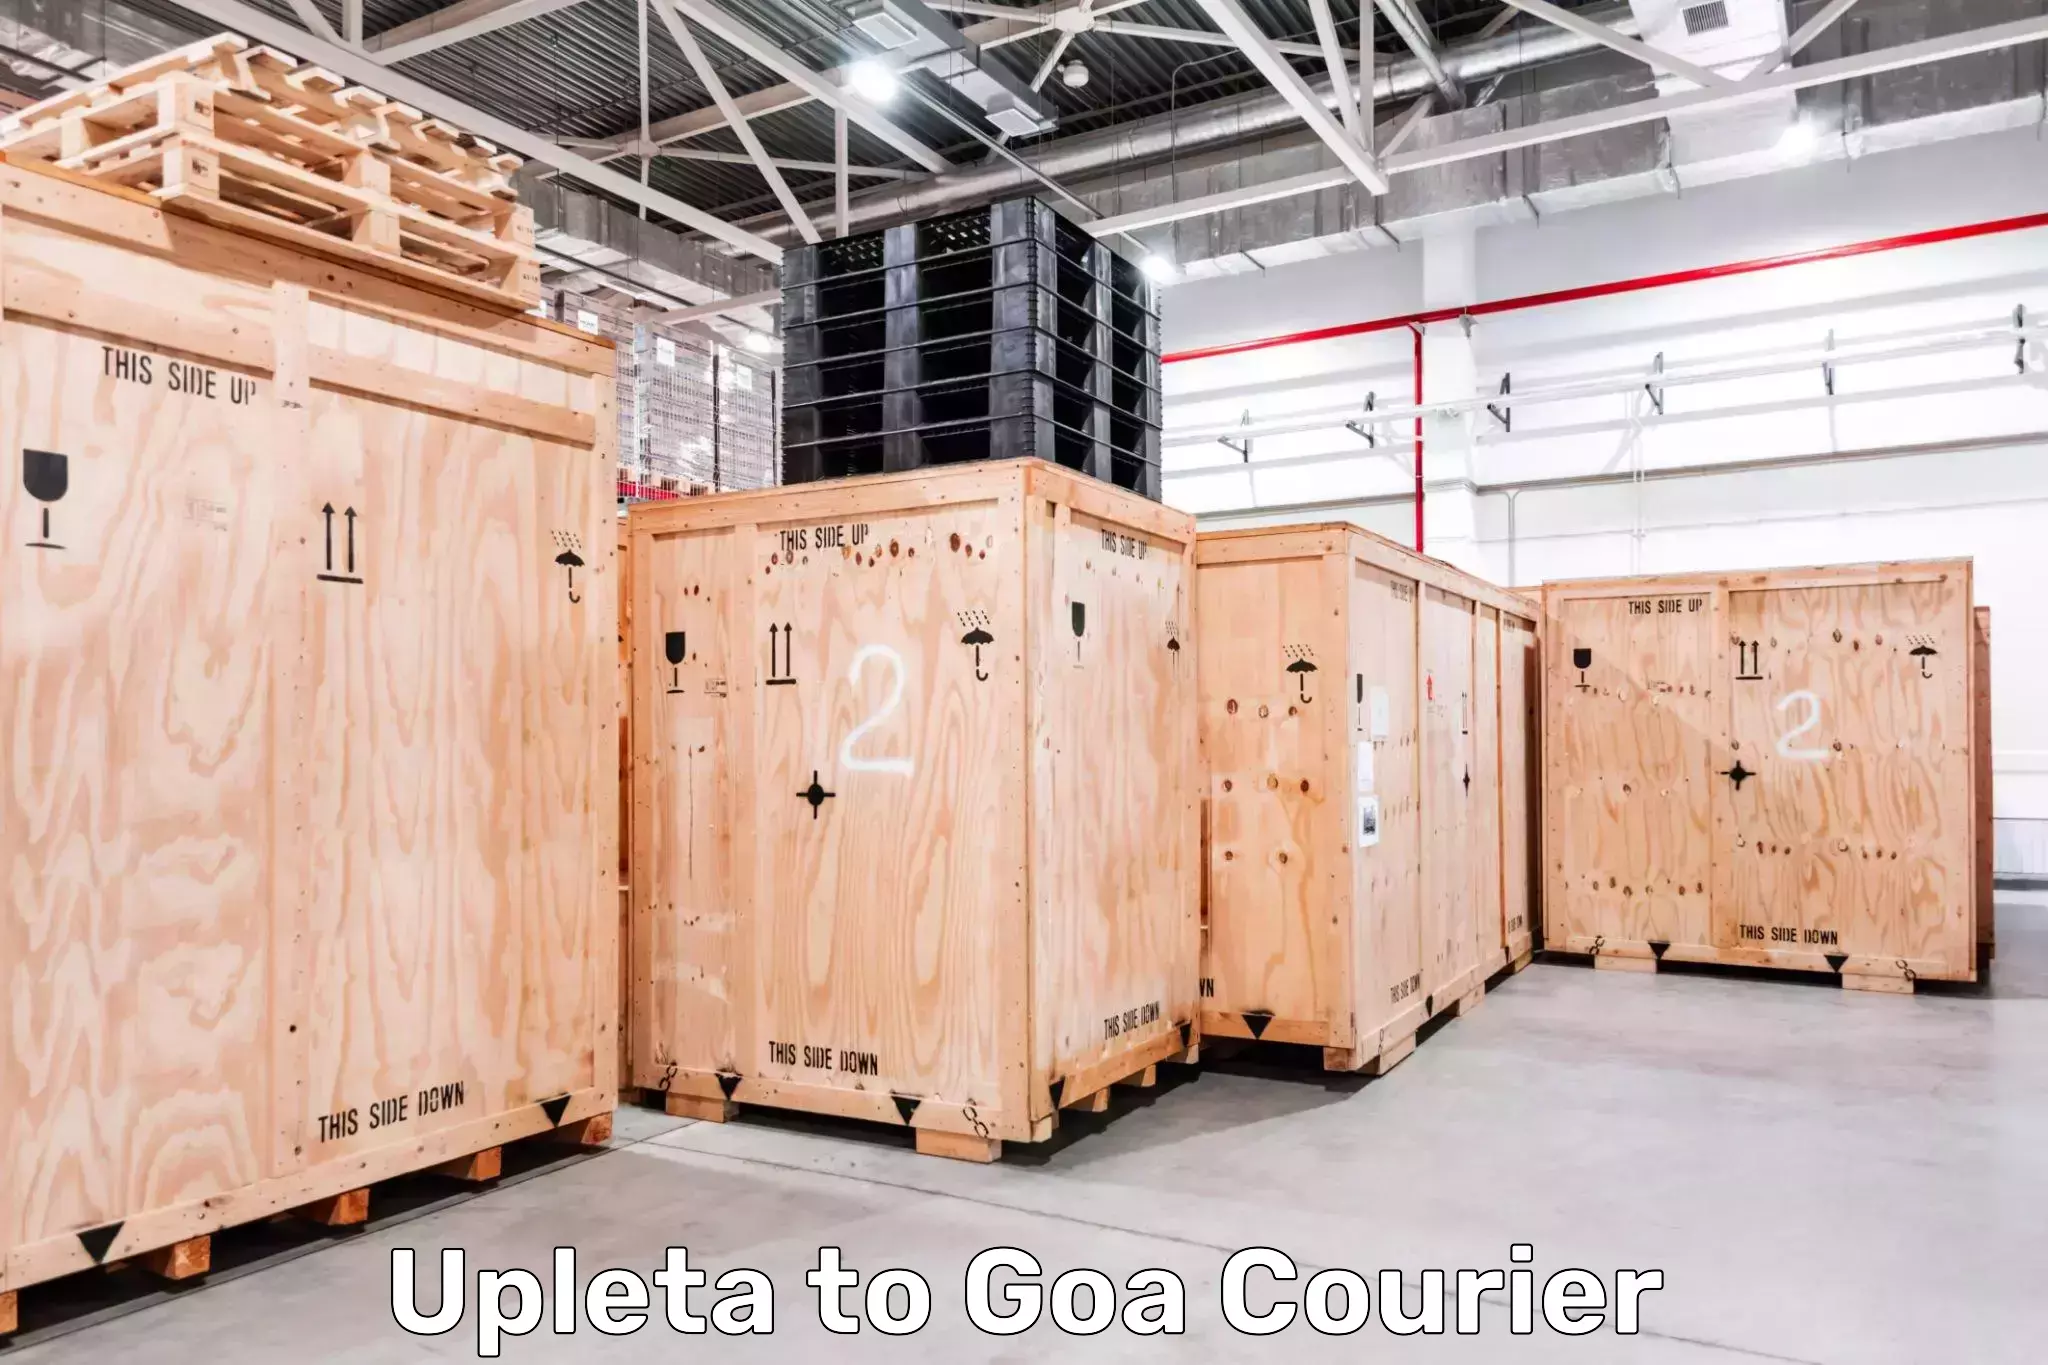 State-of-the-art courier technology Upleta to South Goa